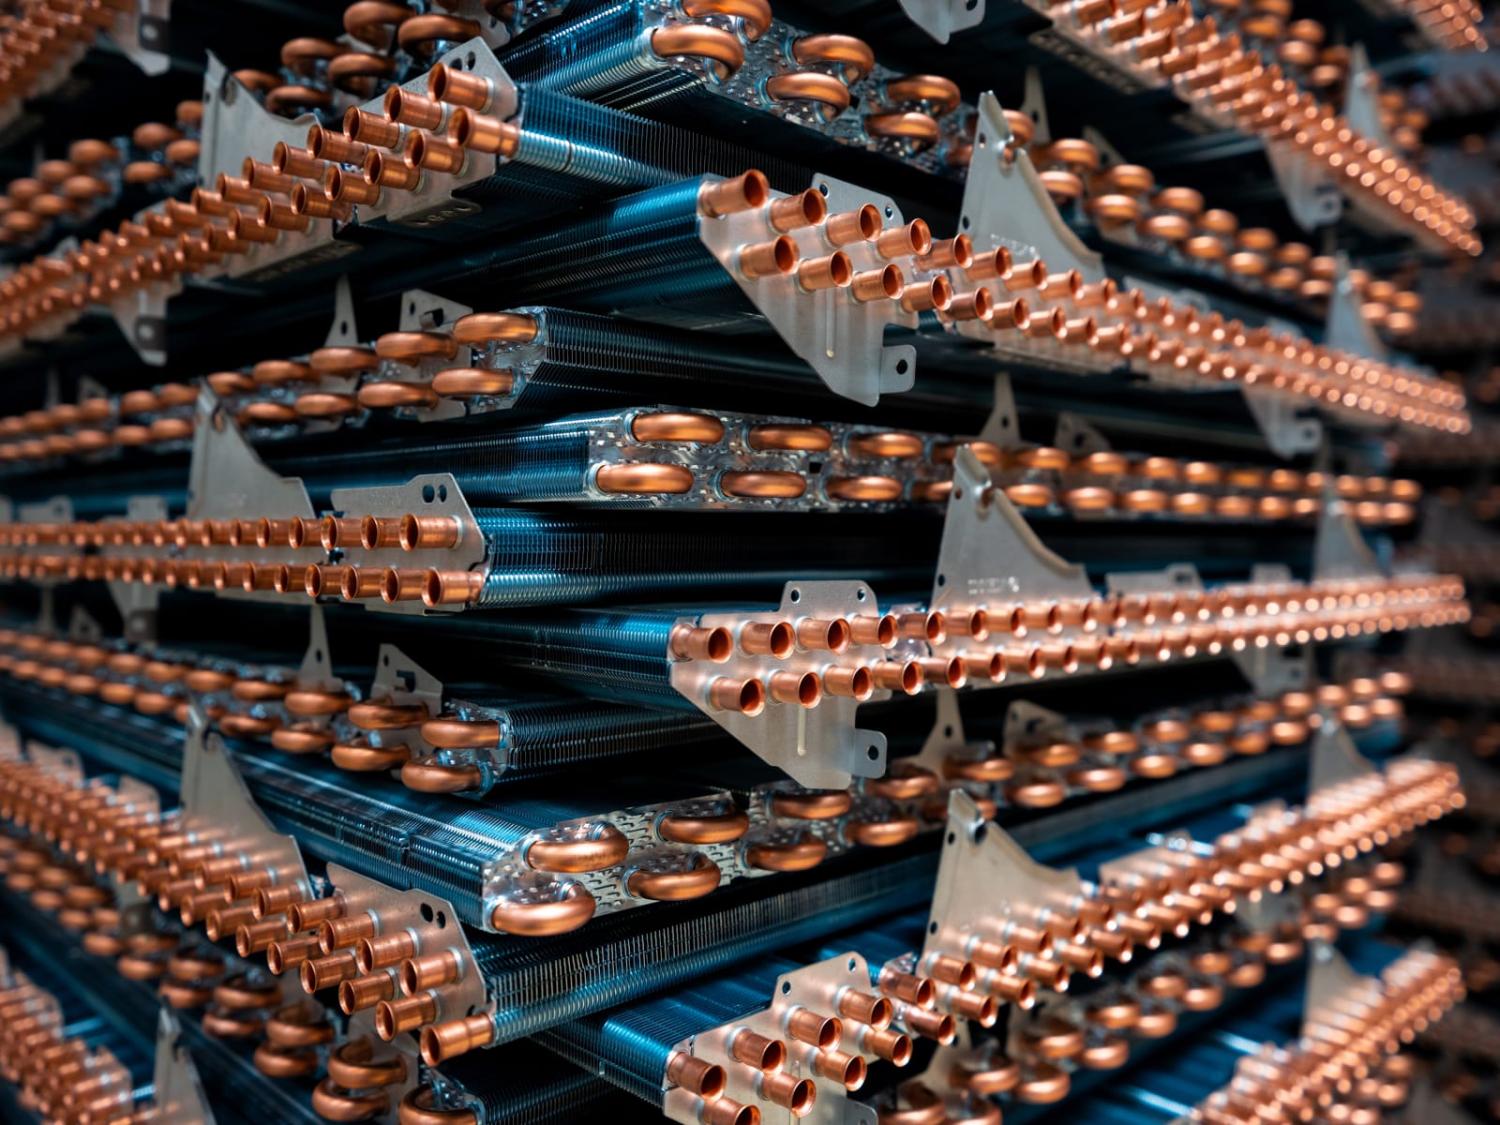 Components at the air conditioner factory of Haier Appliances India Ltd, in Greater Noida, India (Anindito Mukherjee/Bloomberg via Getty Images)